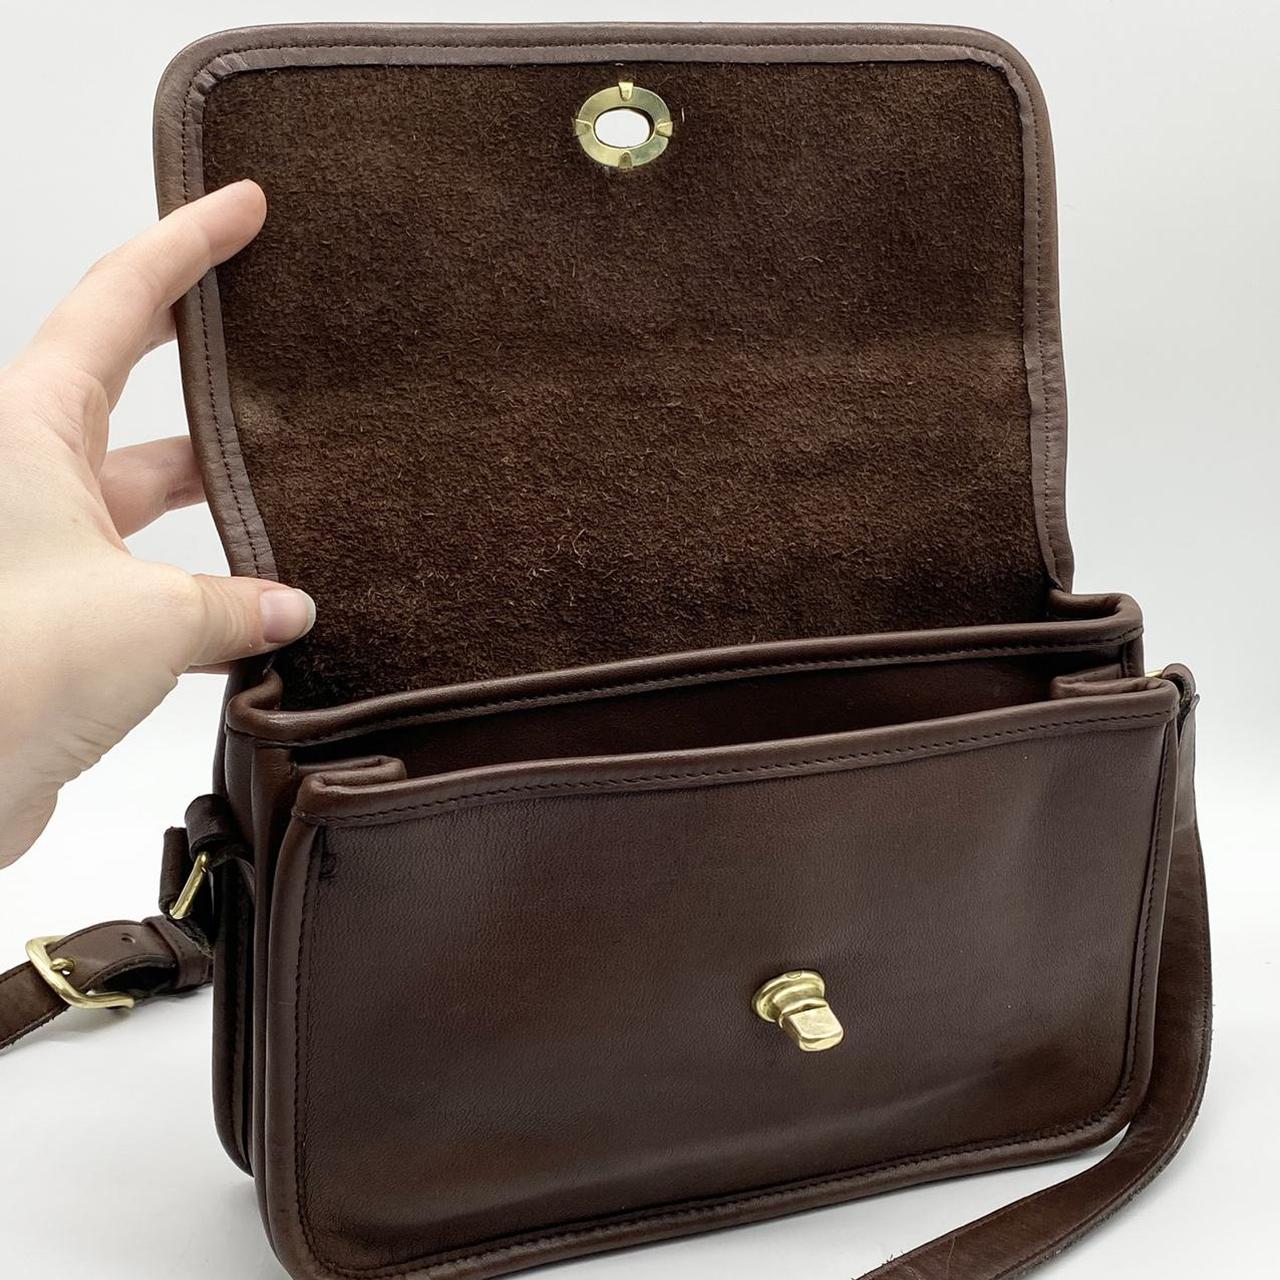 Product Image 3 - Beautiful vintage Coach compartment bag